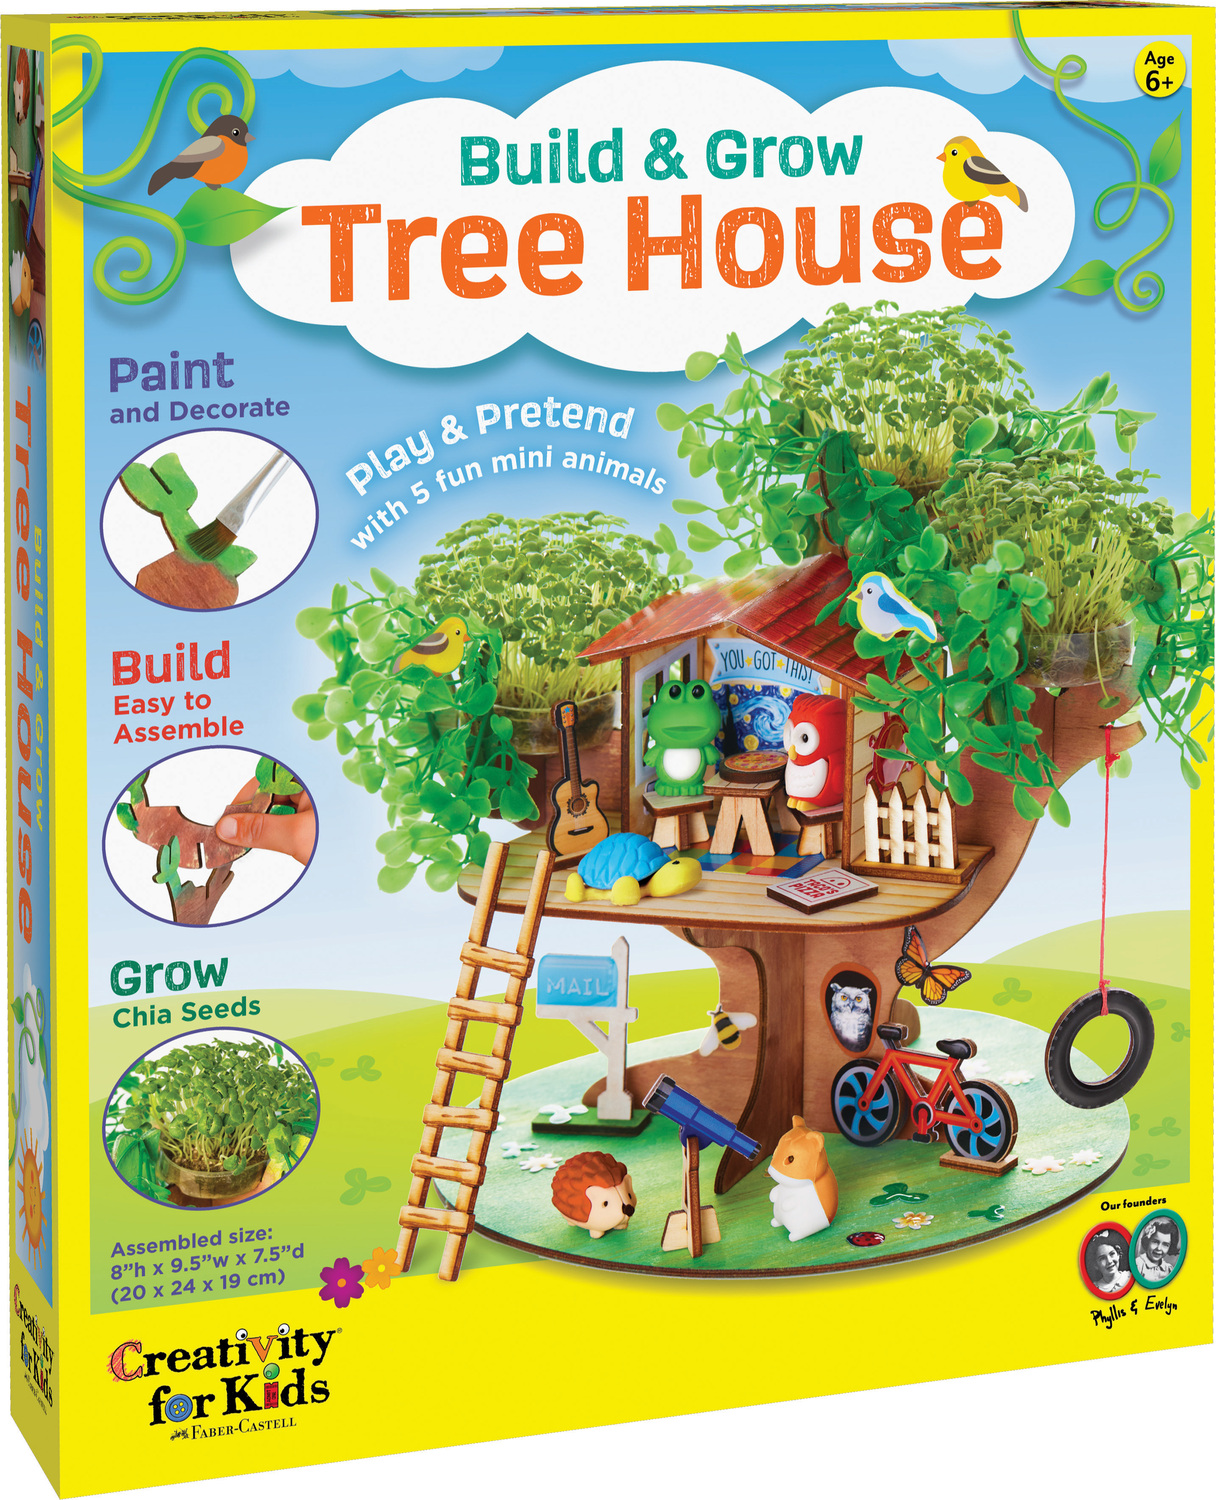 Build & Grow Tree House - Givens Books and Little Dickens